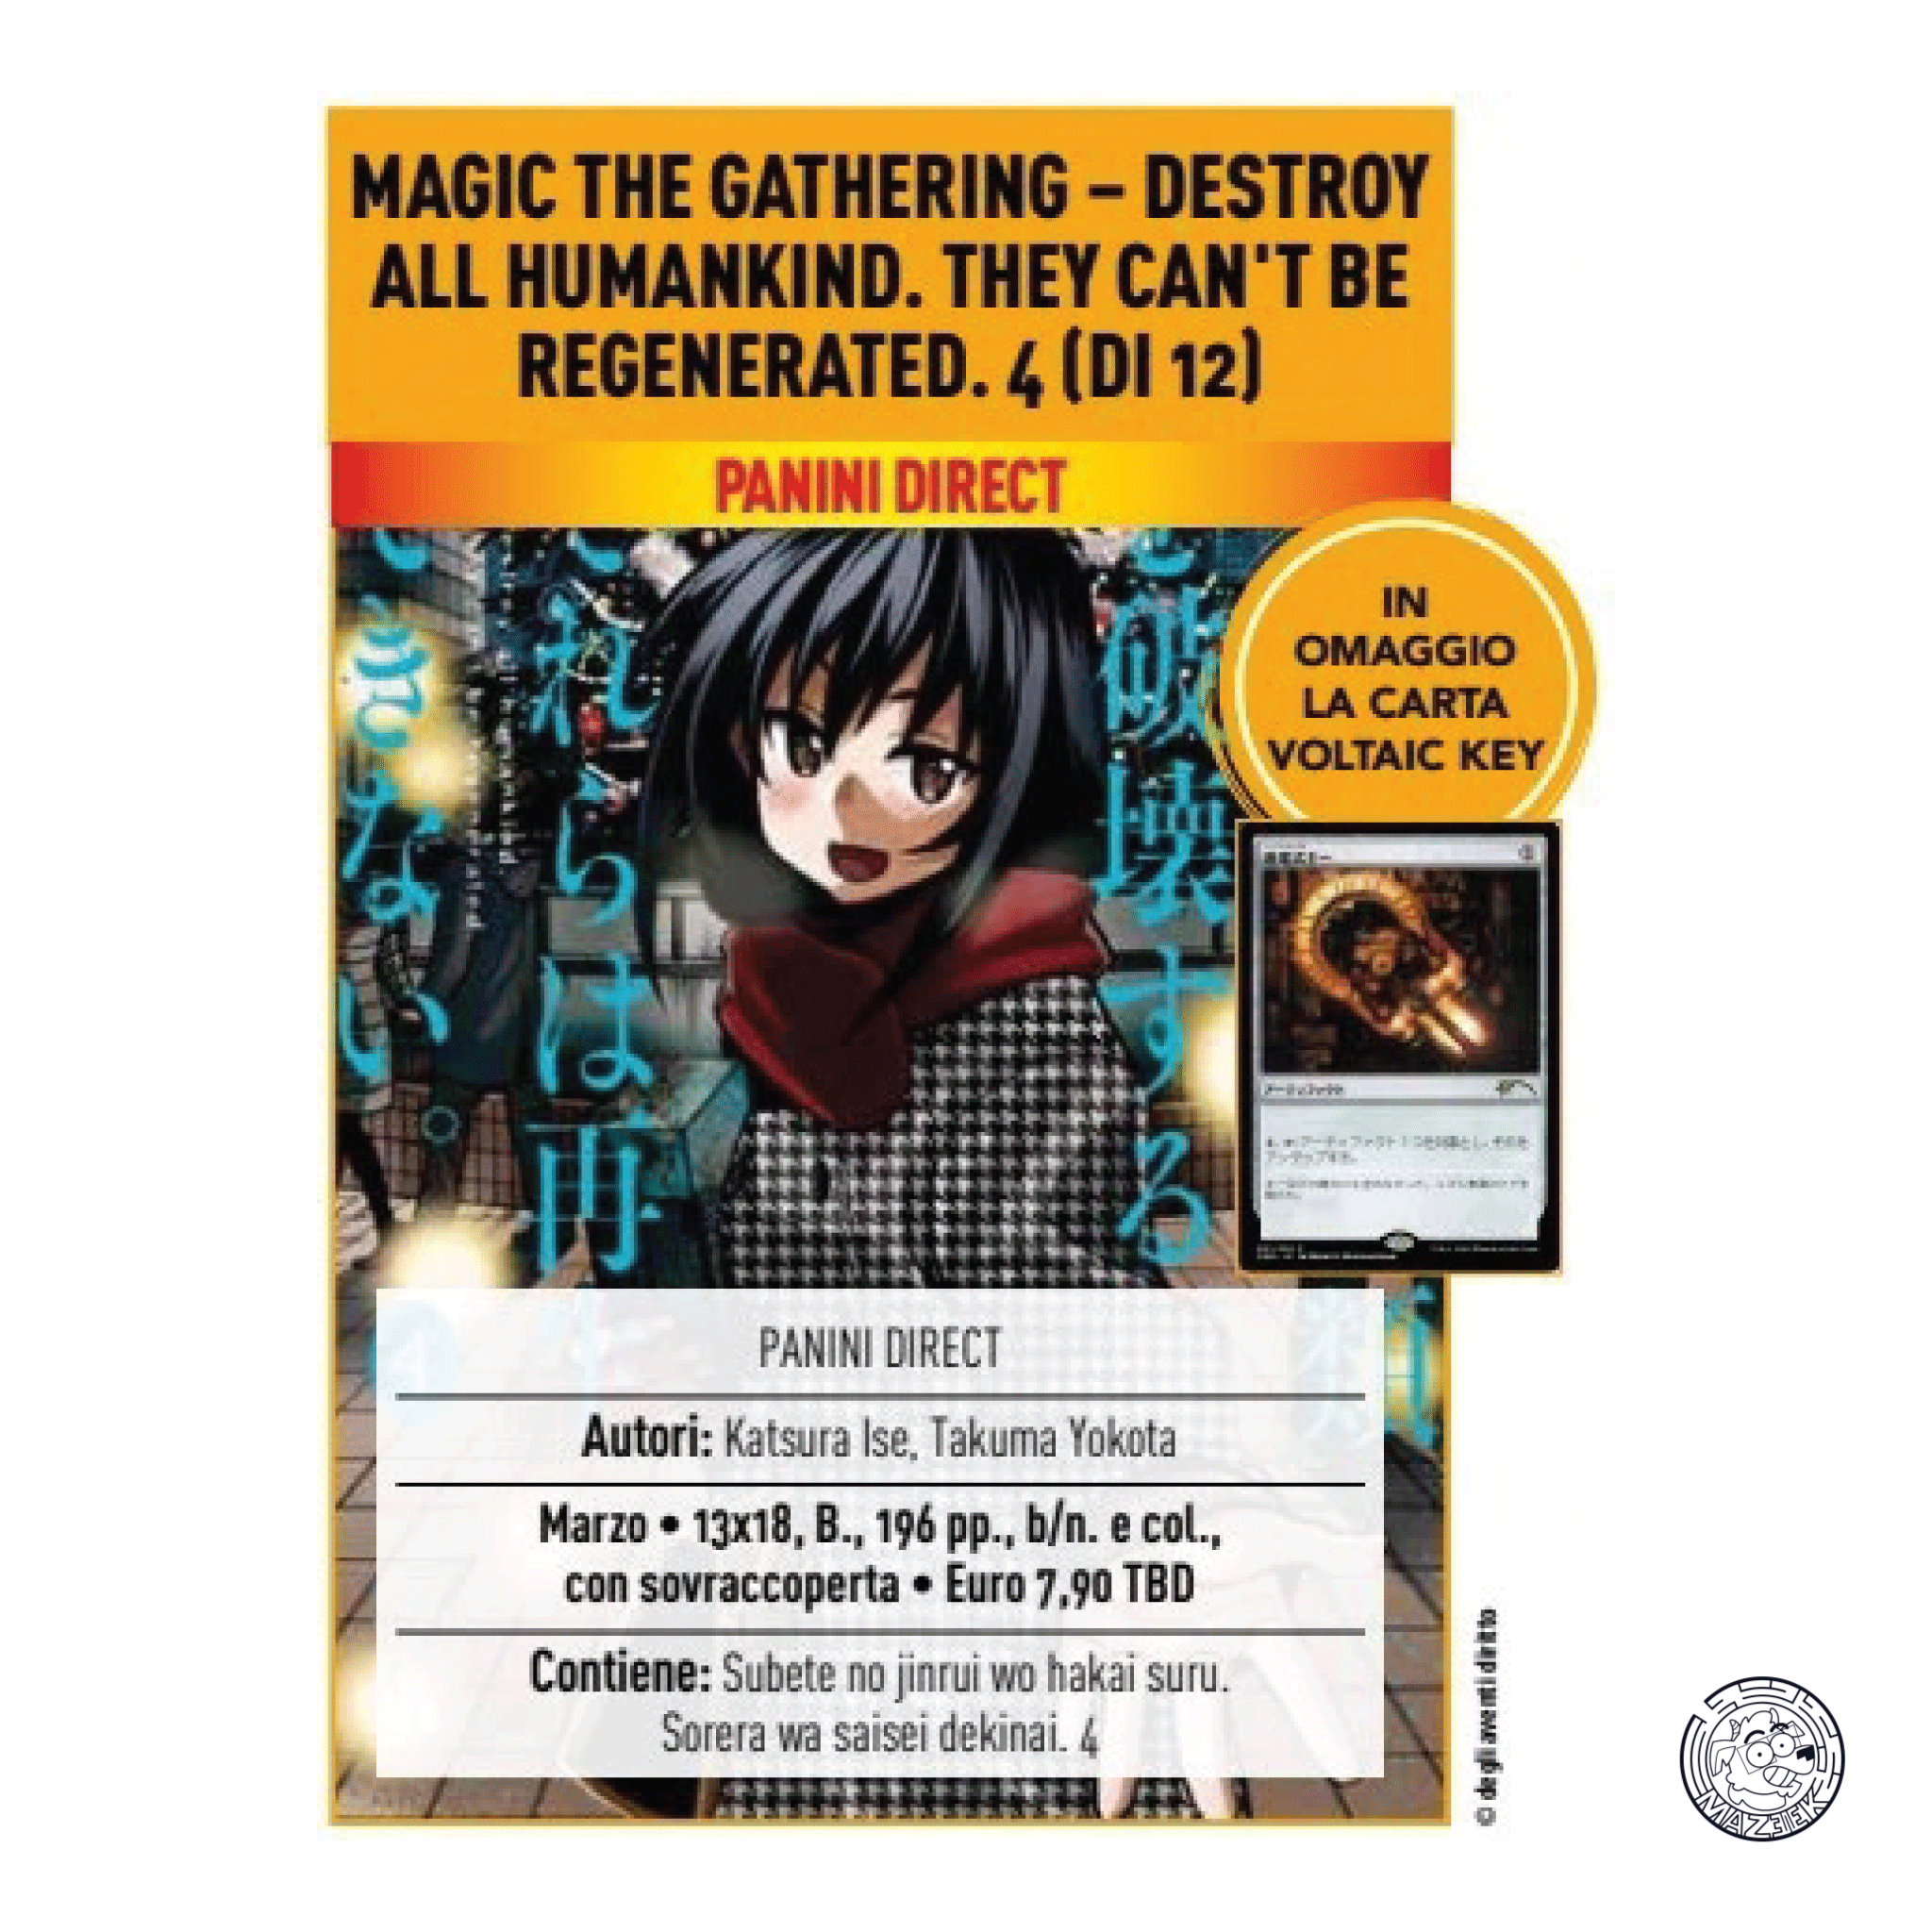 Magic the Gathering – Destroy All Humankind. They Can't Be Regenerated 04 (+ Voltaic Key card)